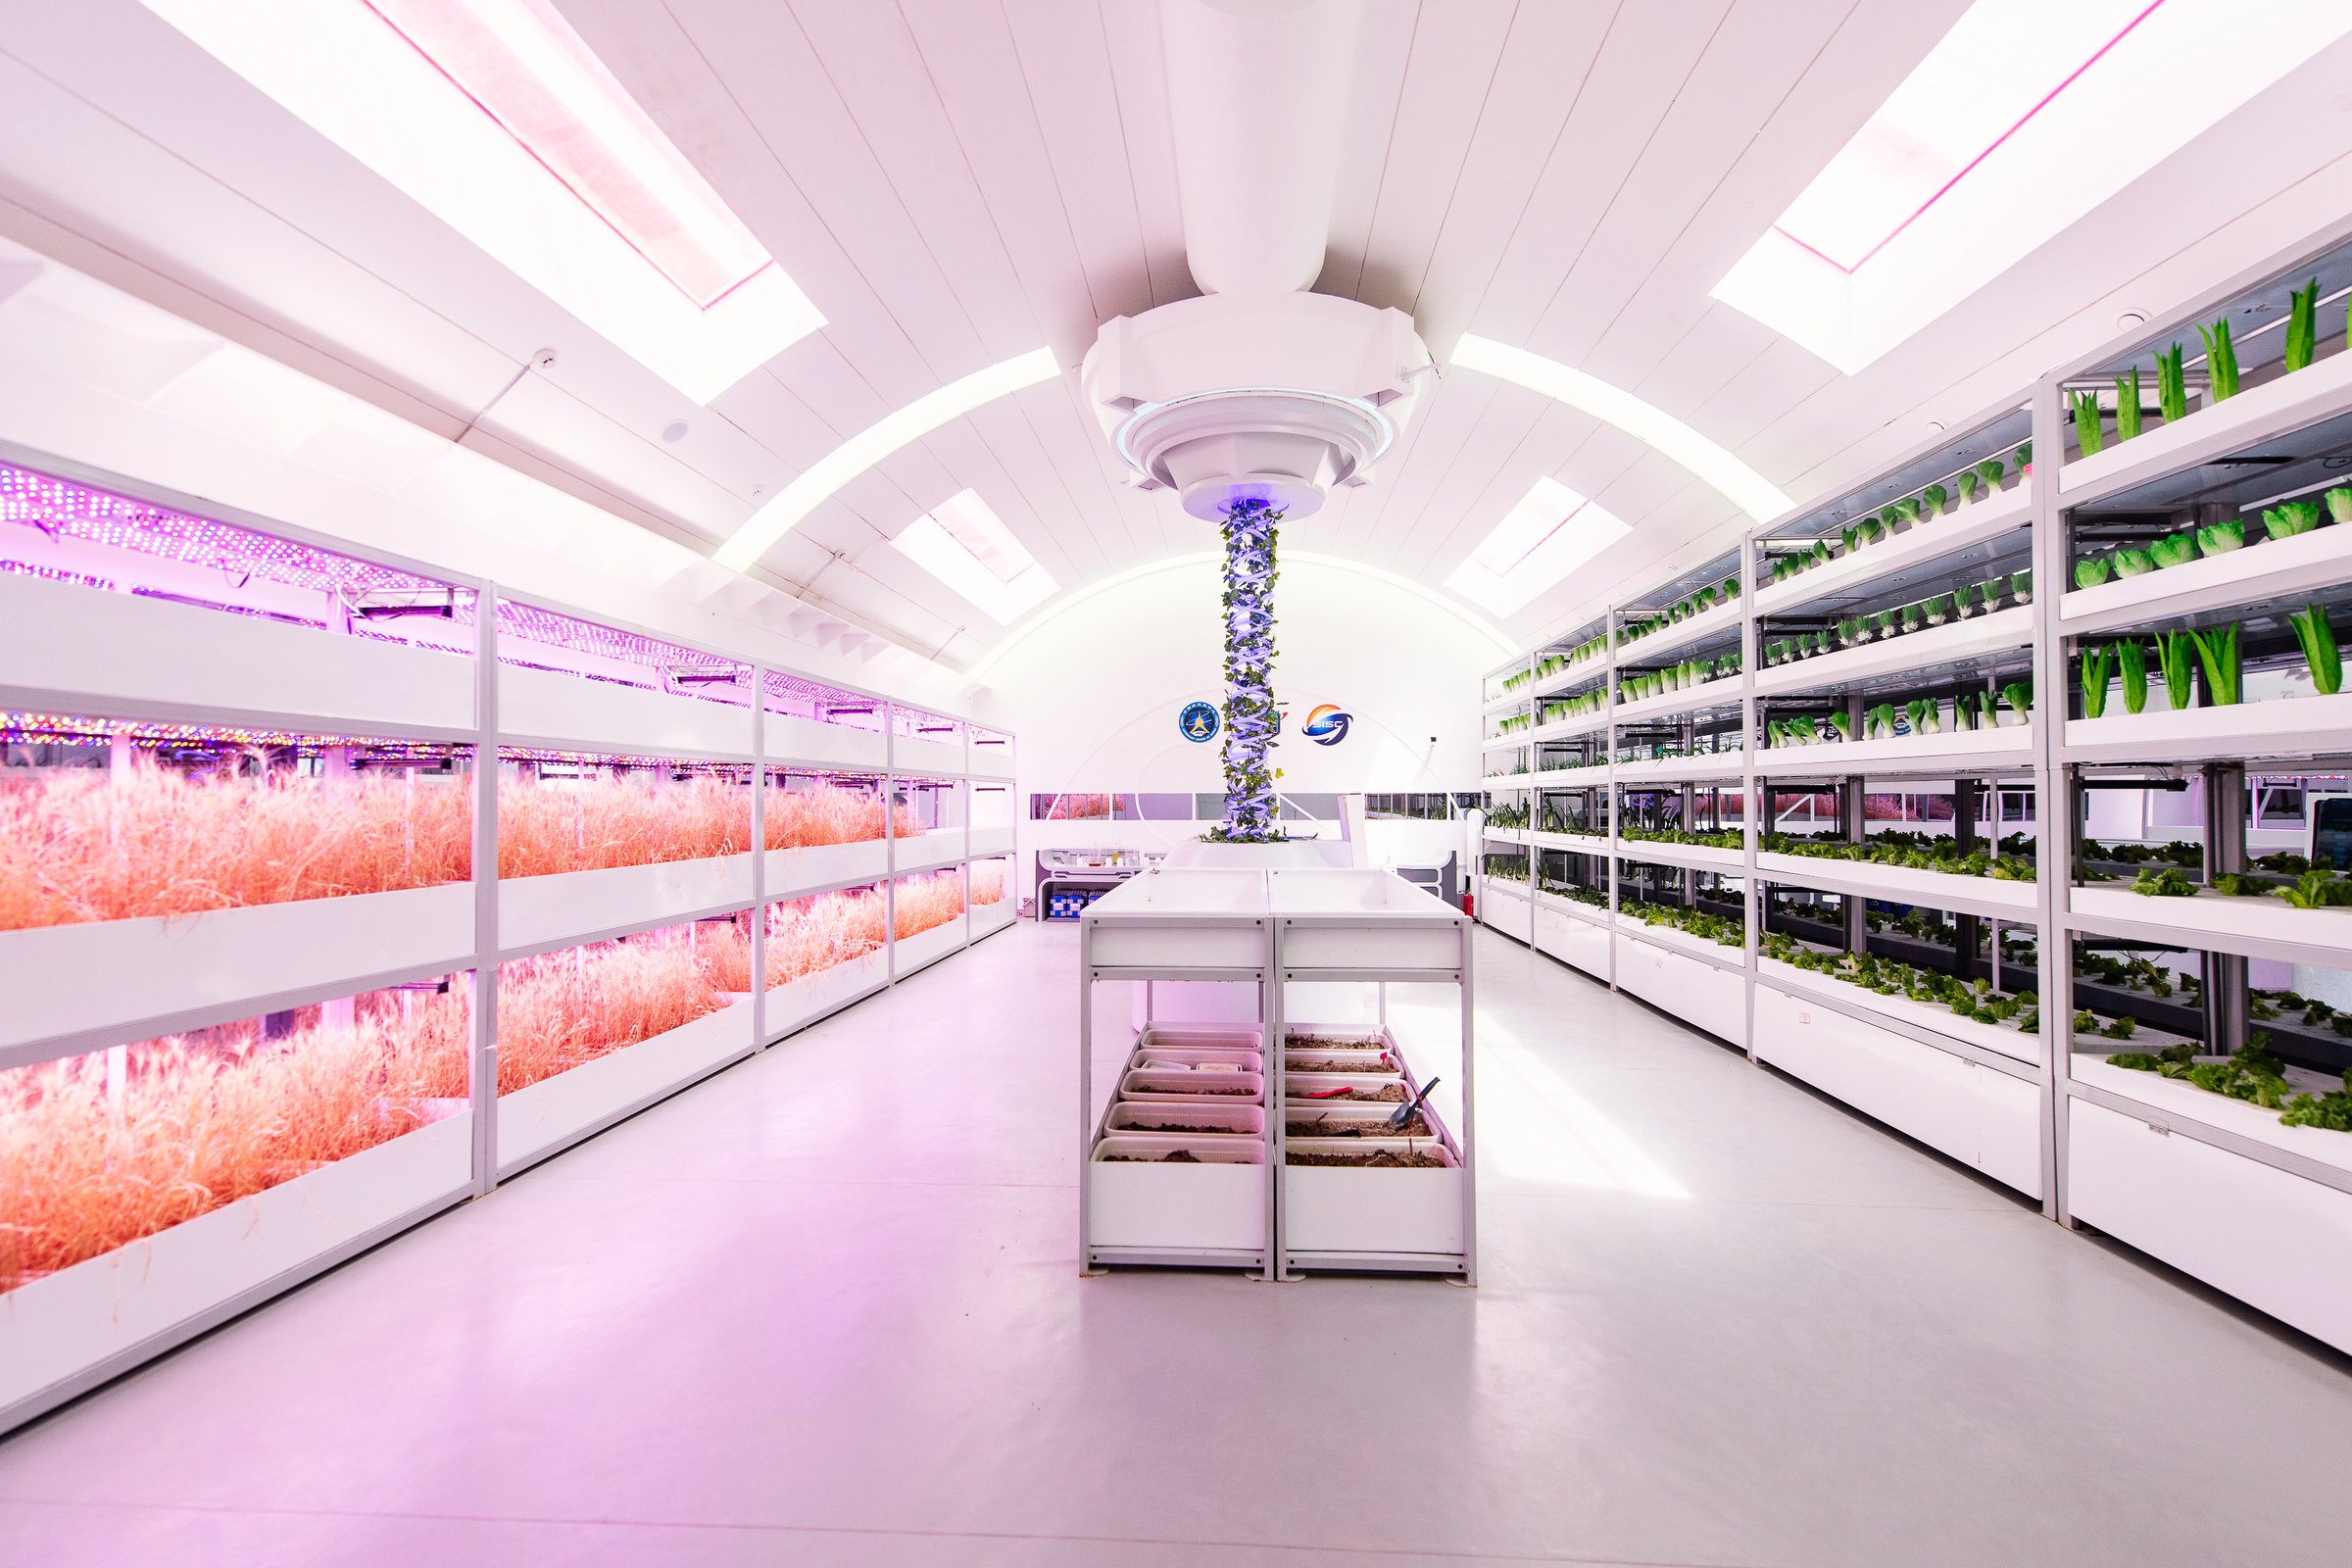  The food growing facility is the Mars simulation base. C-Space is located in the Gobi Desert, some 40 km from Jinchang in China's northwest Gansu province. Finding the way to grow fresh food in space would vastly reduce the rocket payload and open t